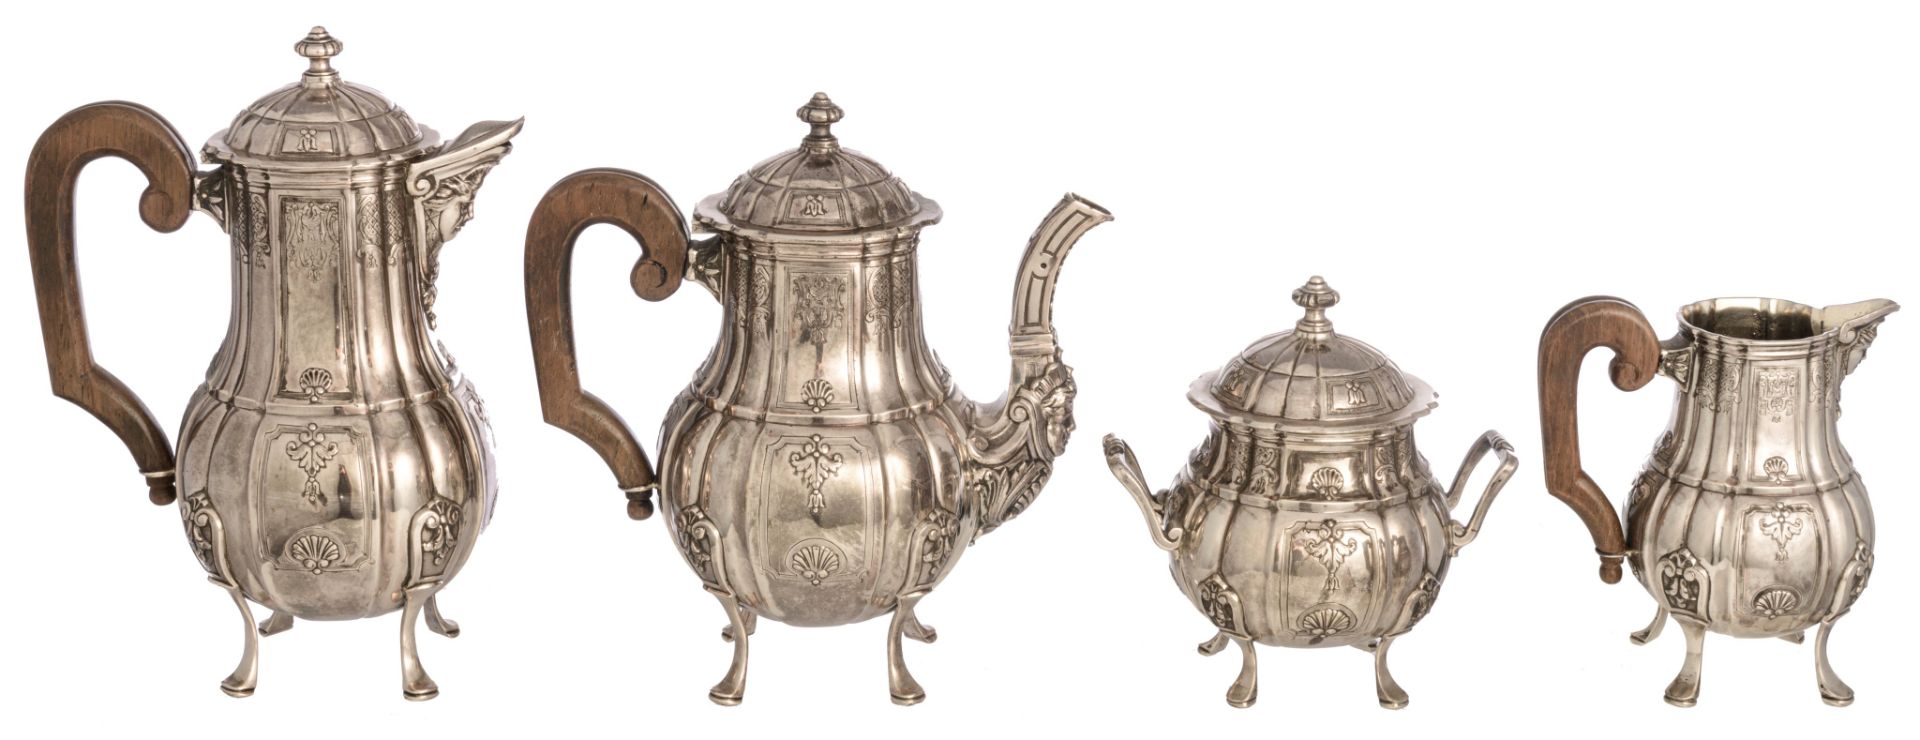 A four-part Belgian silver coffee and tea set, H 15 - 29 cm / total weight c. 4.290 g